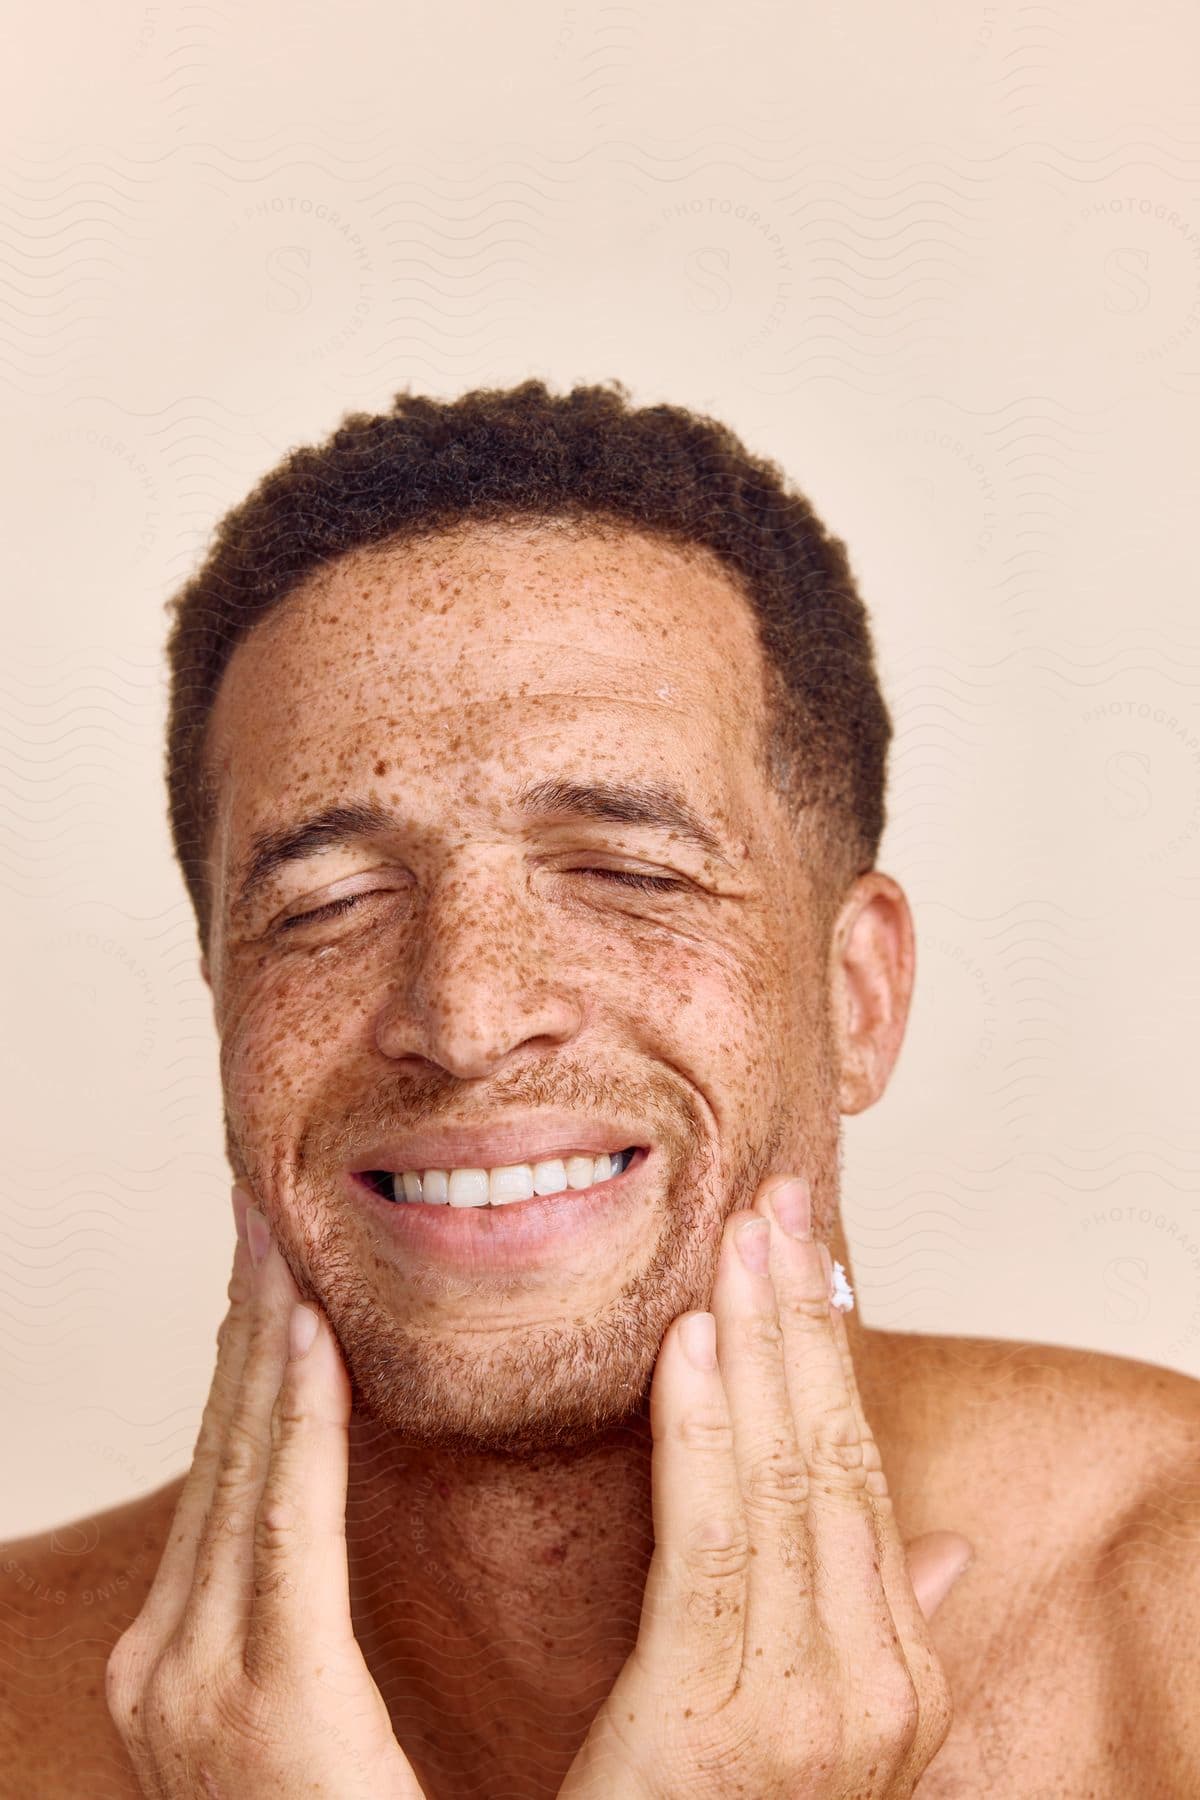 Close-up of a smiling man's face with spots on his skin.